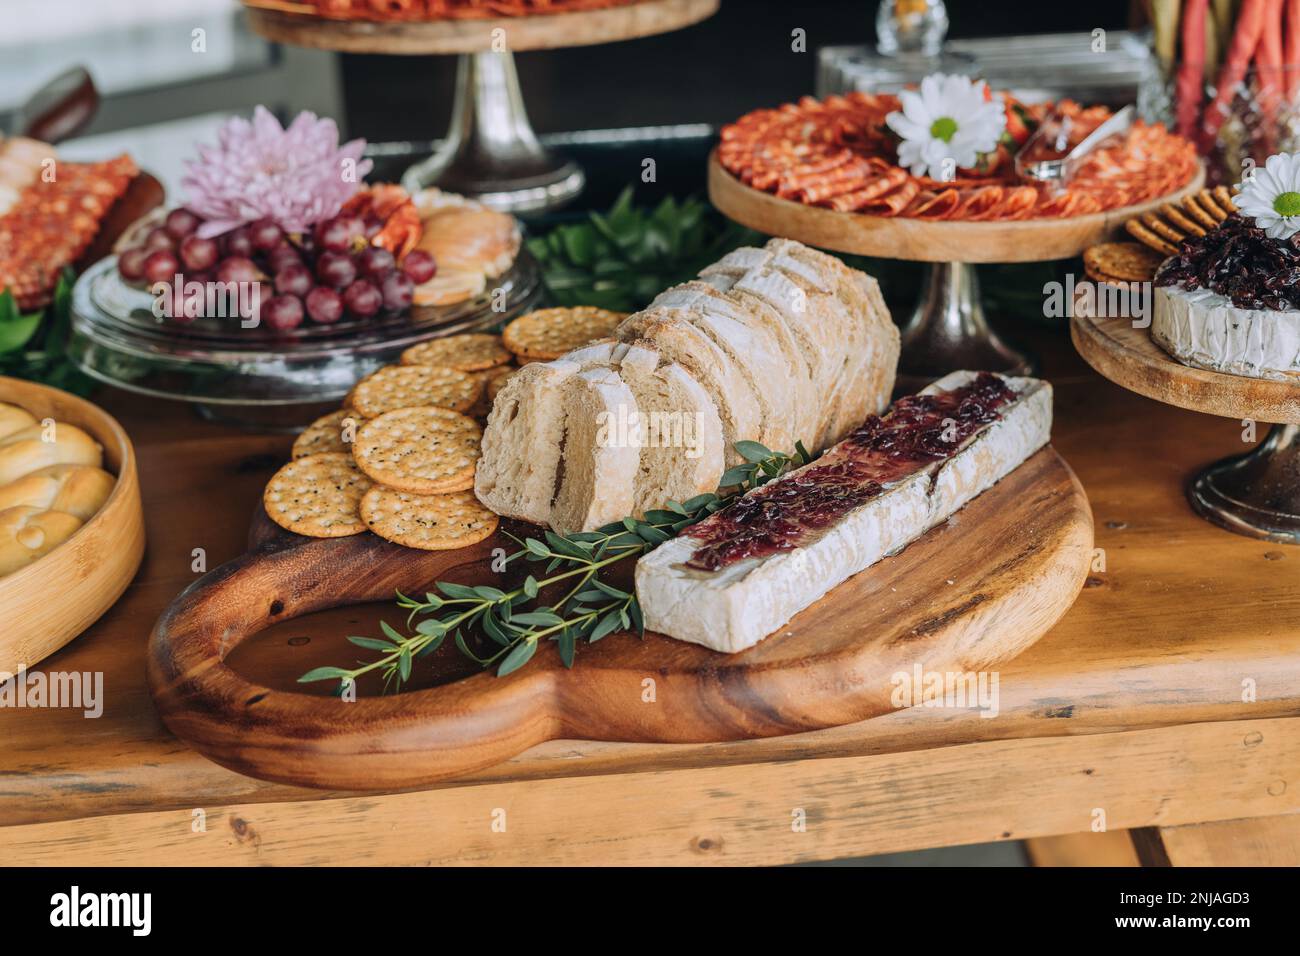 A variety of appetizers including various meats, cheese, and fruits arranged on multiple plates and platters on a wooden table Stock Photo